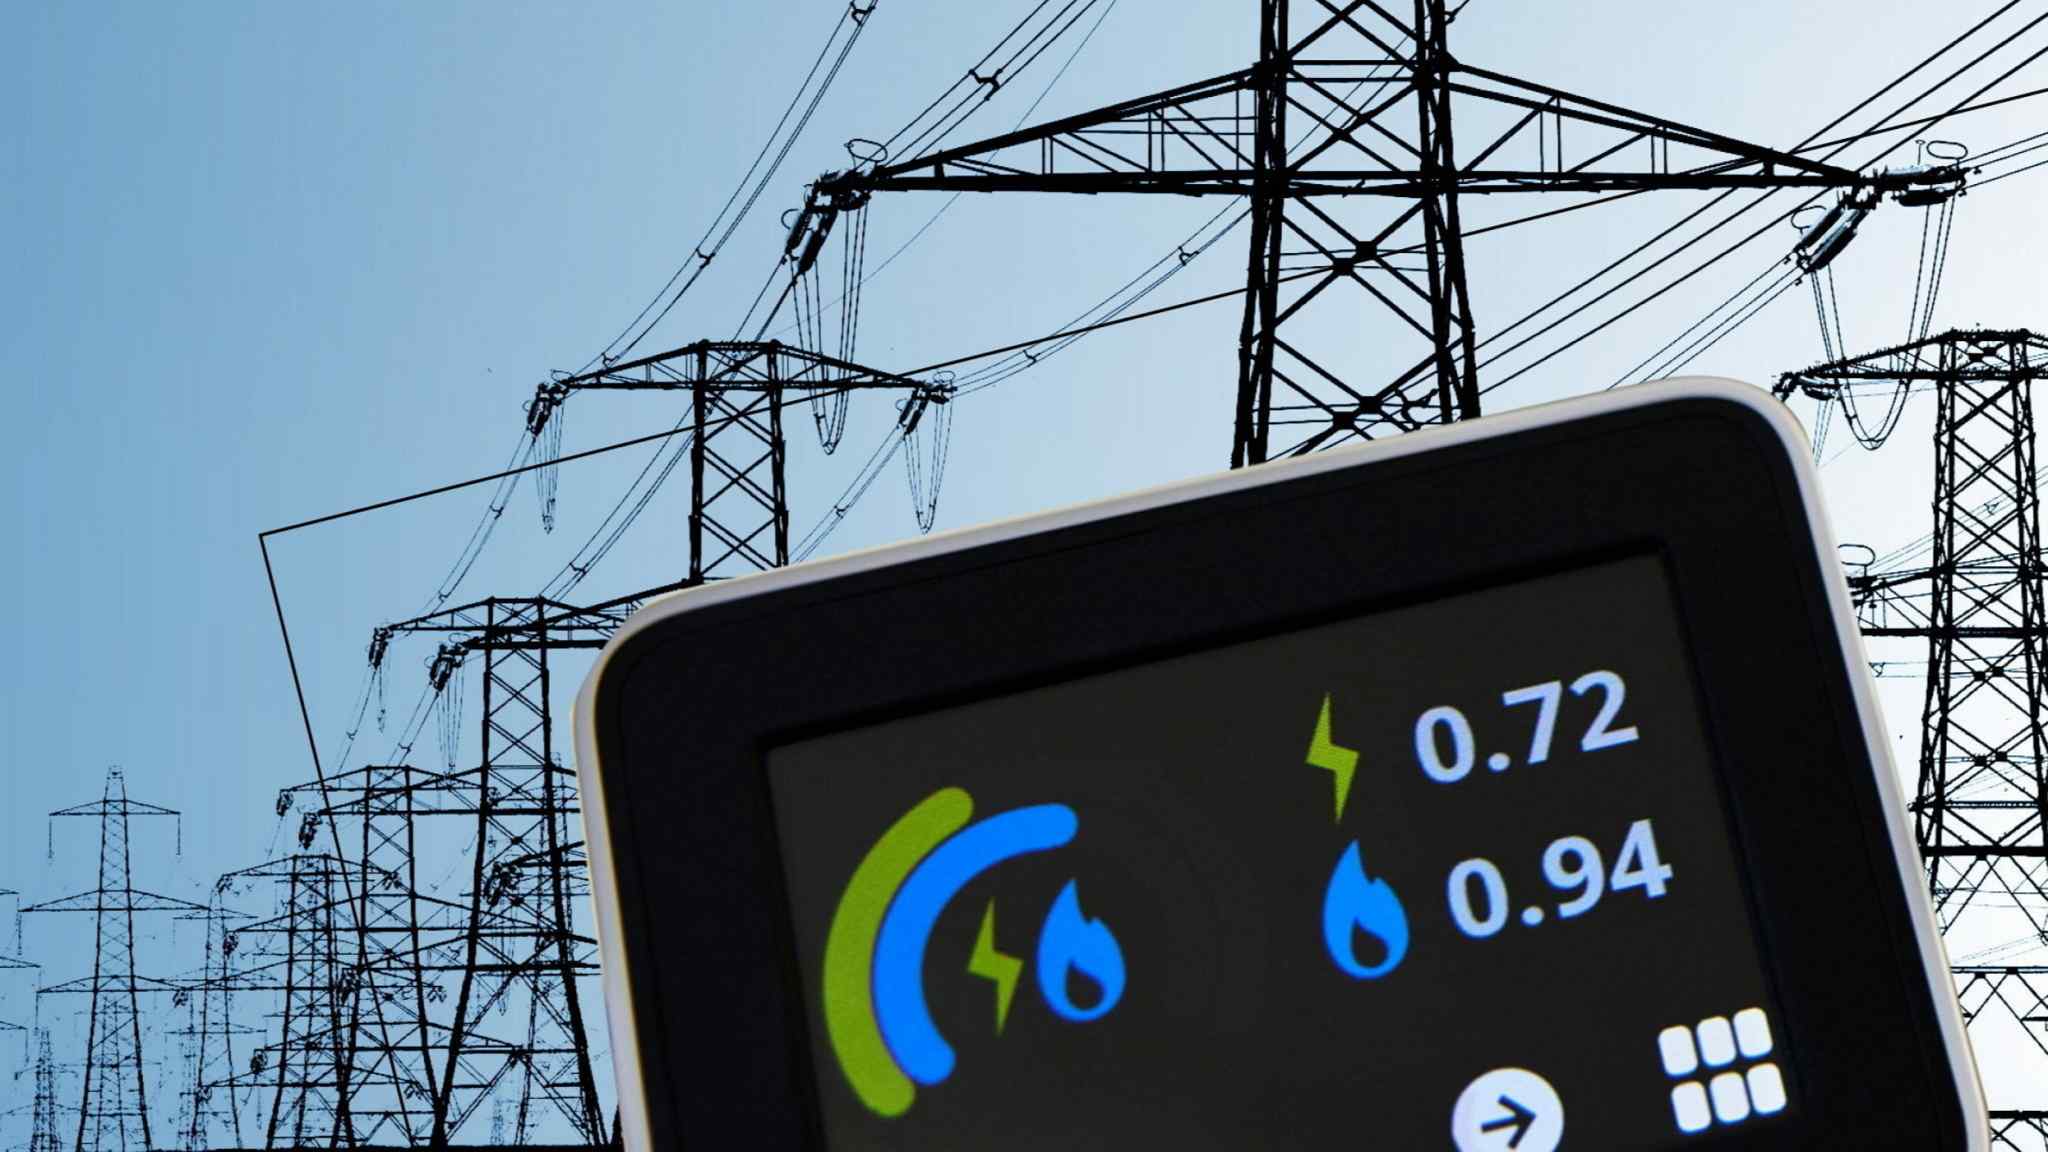 Live news updates: National Grid warns Britons to prepare to cut electricity use